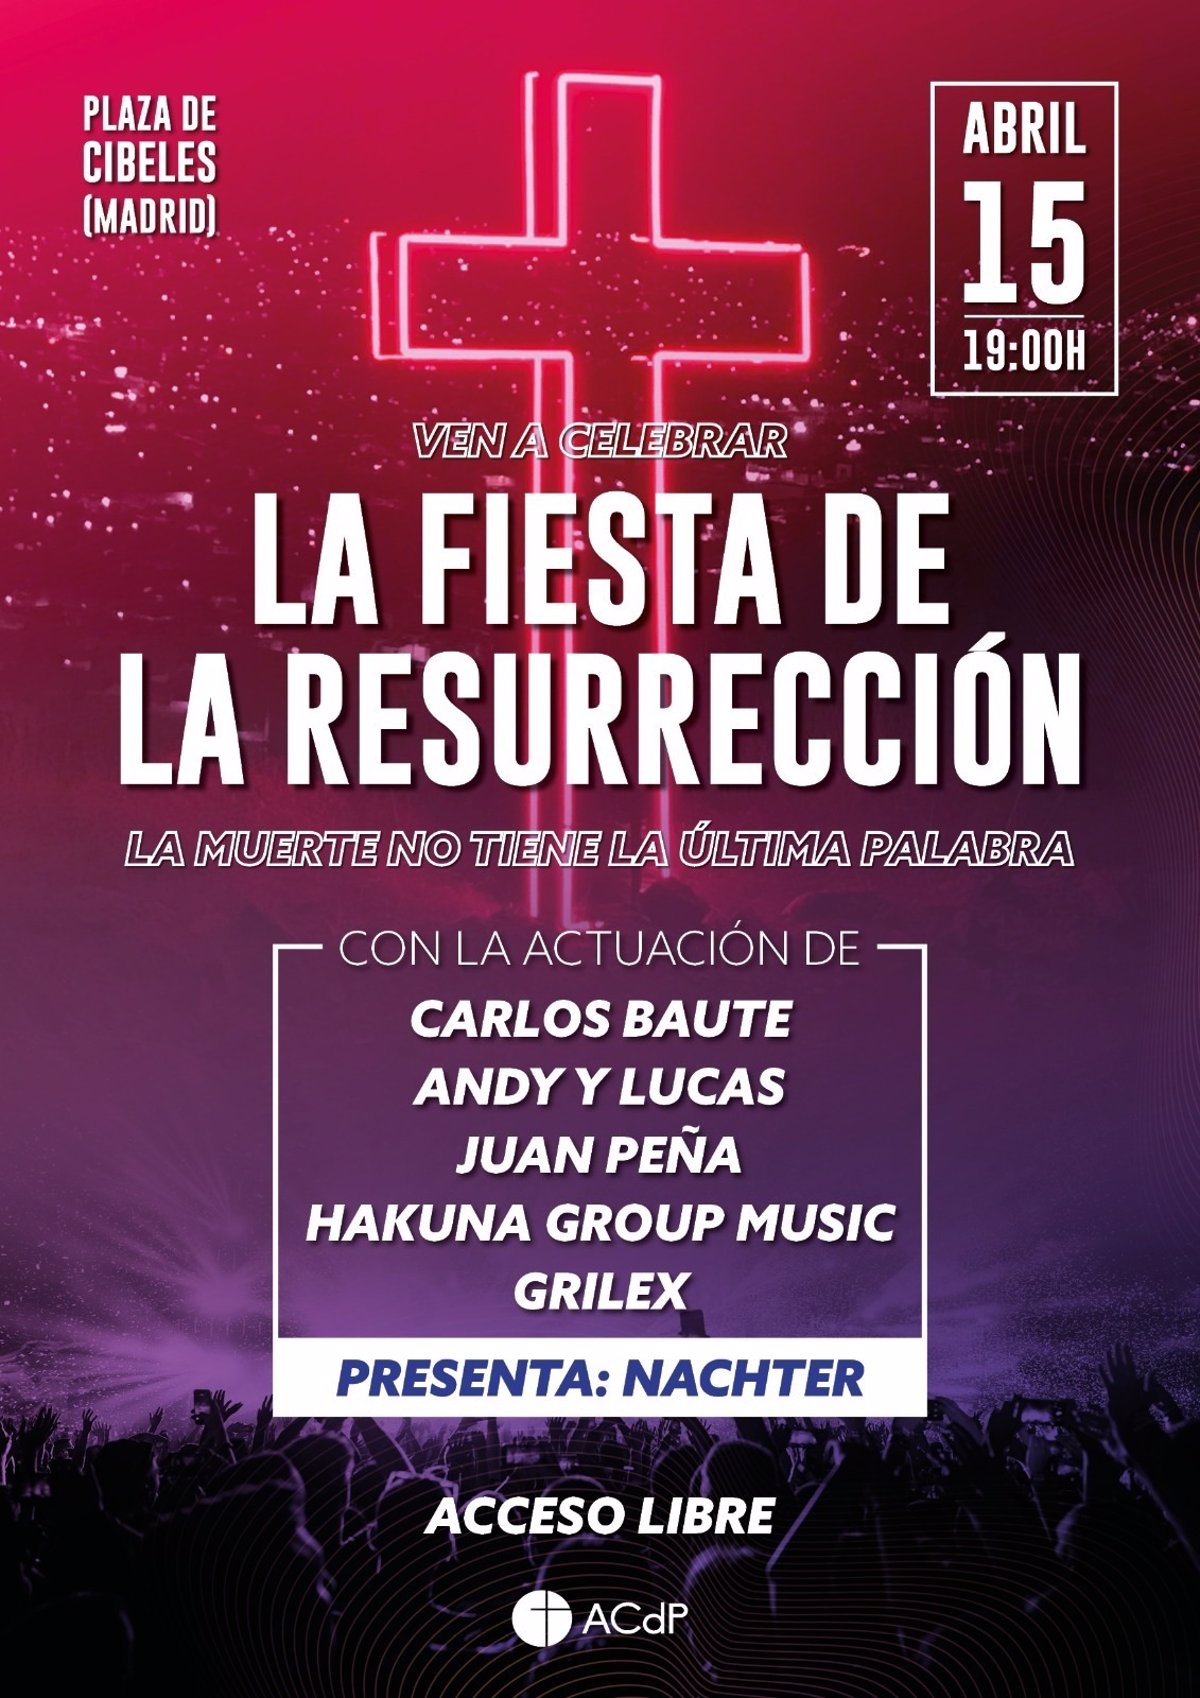 A Catholic festival will bring together Carlos Baute, Andy & Lucas and Hakuna Group Music in Madrid